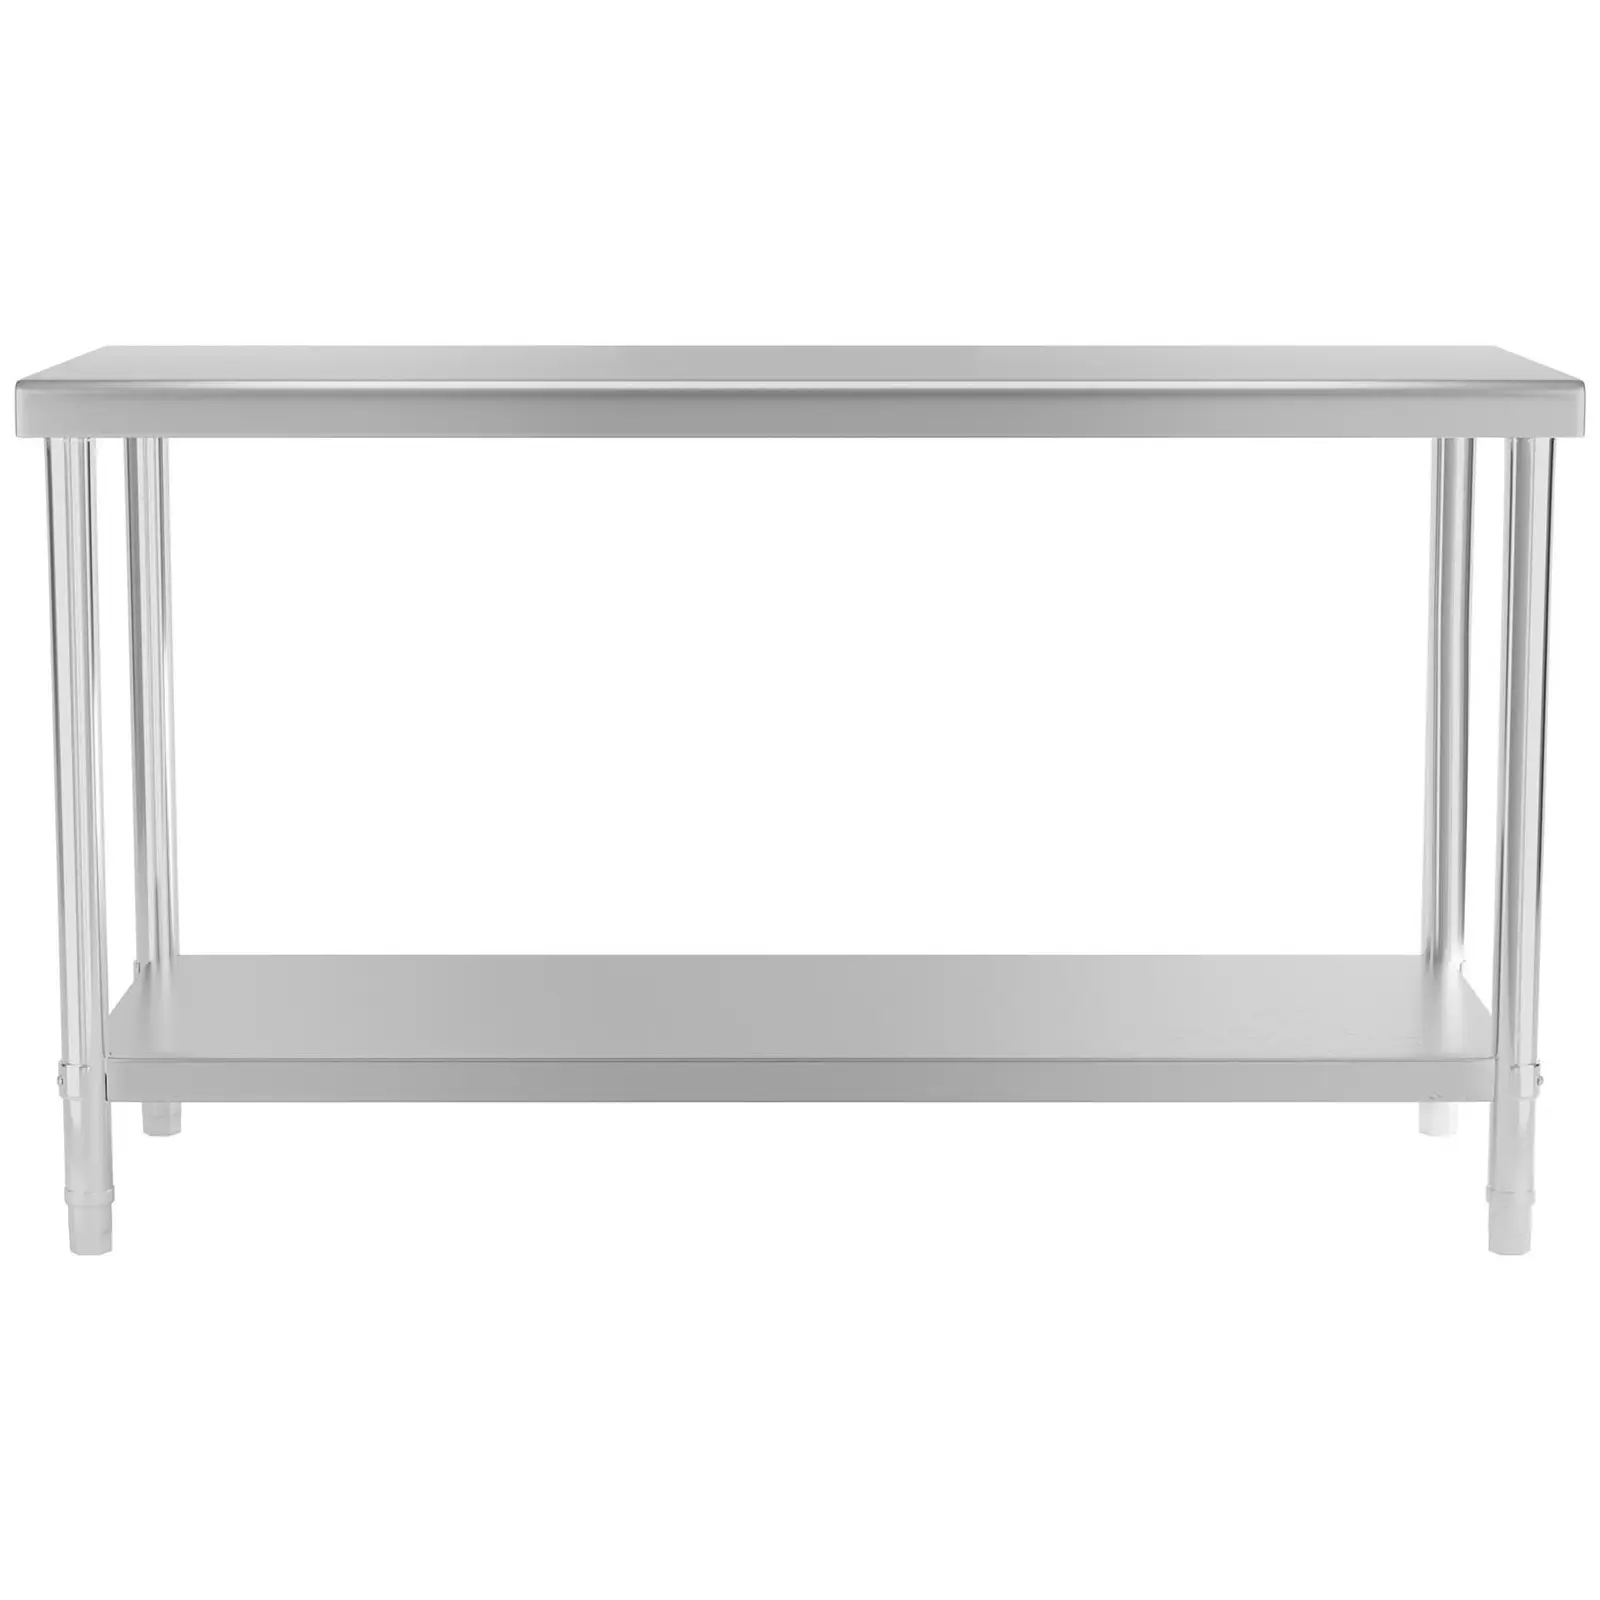 Stainless Steel Work Table - 150 x 60 cm - 230 kg load capacity